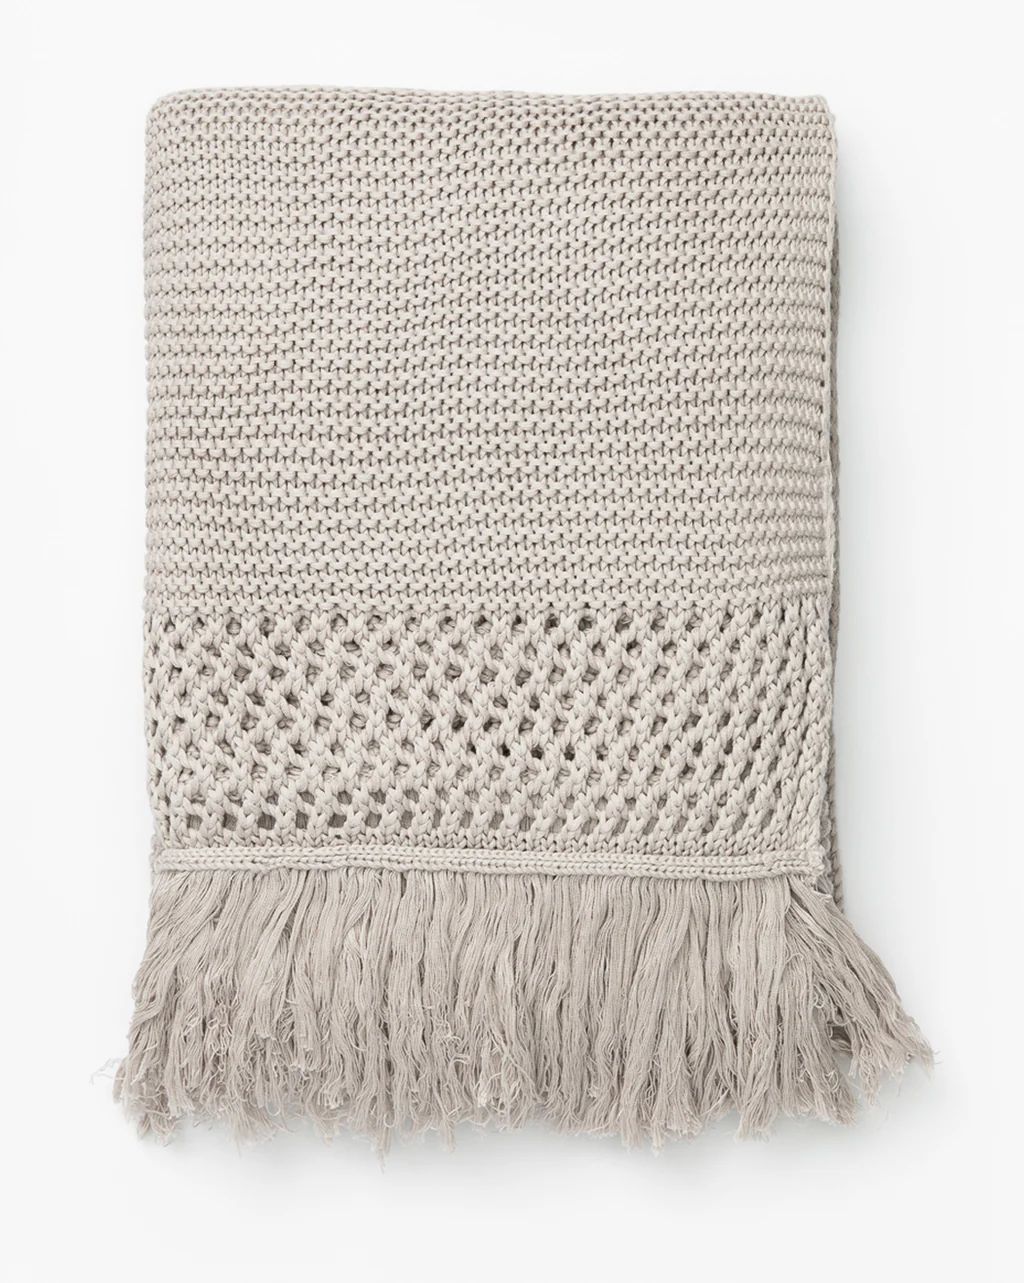 Woven Fringed Throw | McGee & Co.